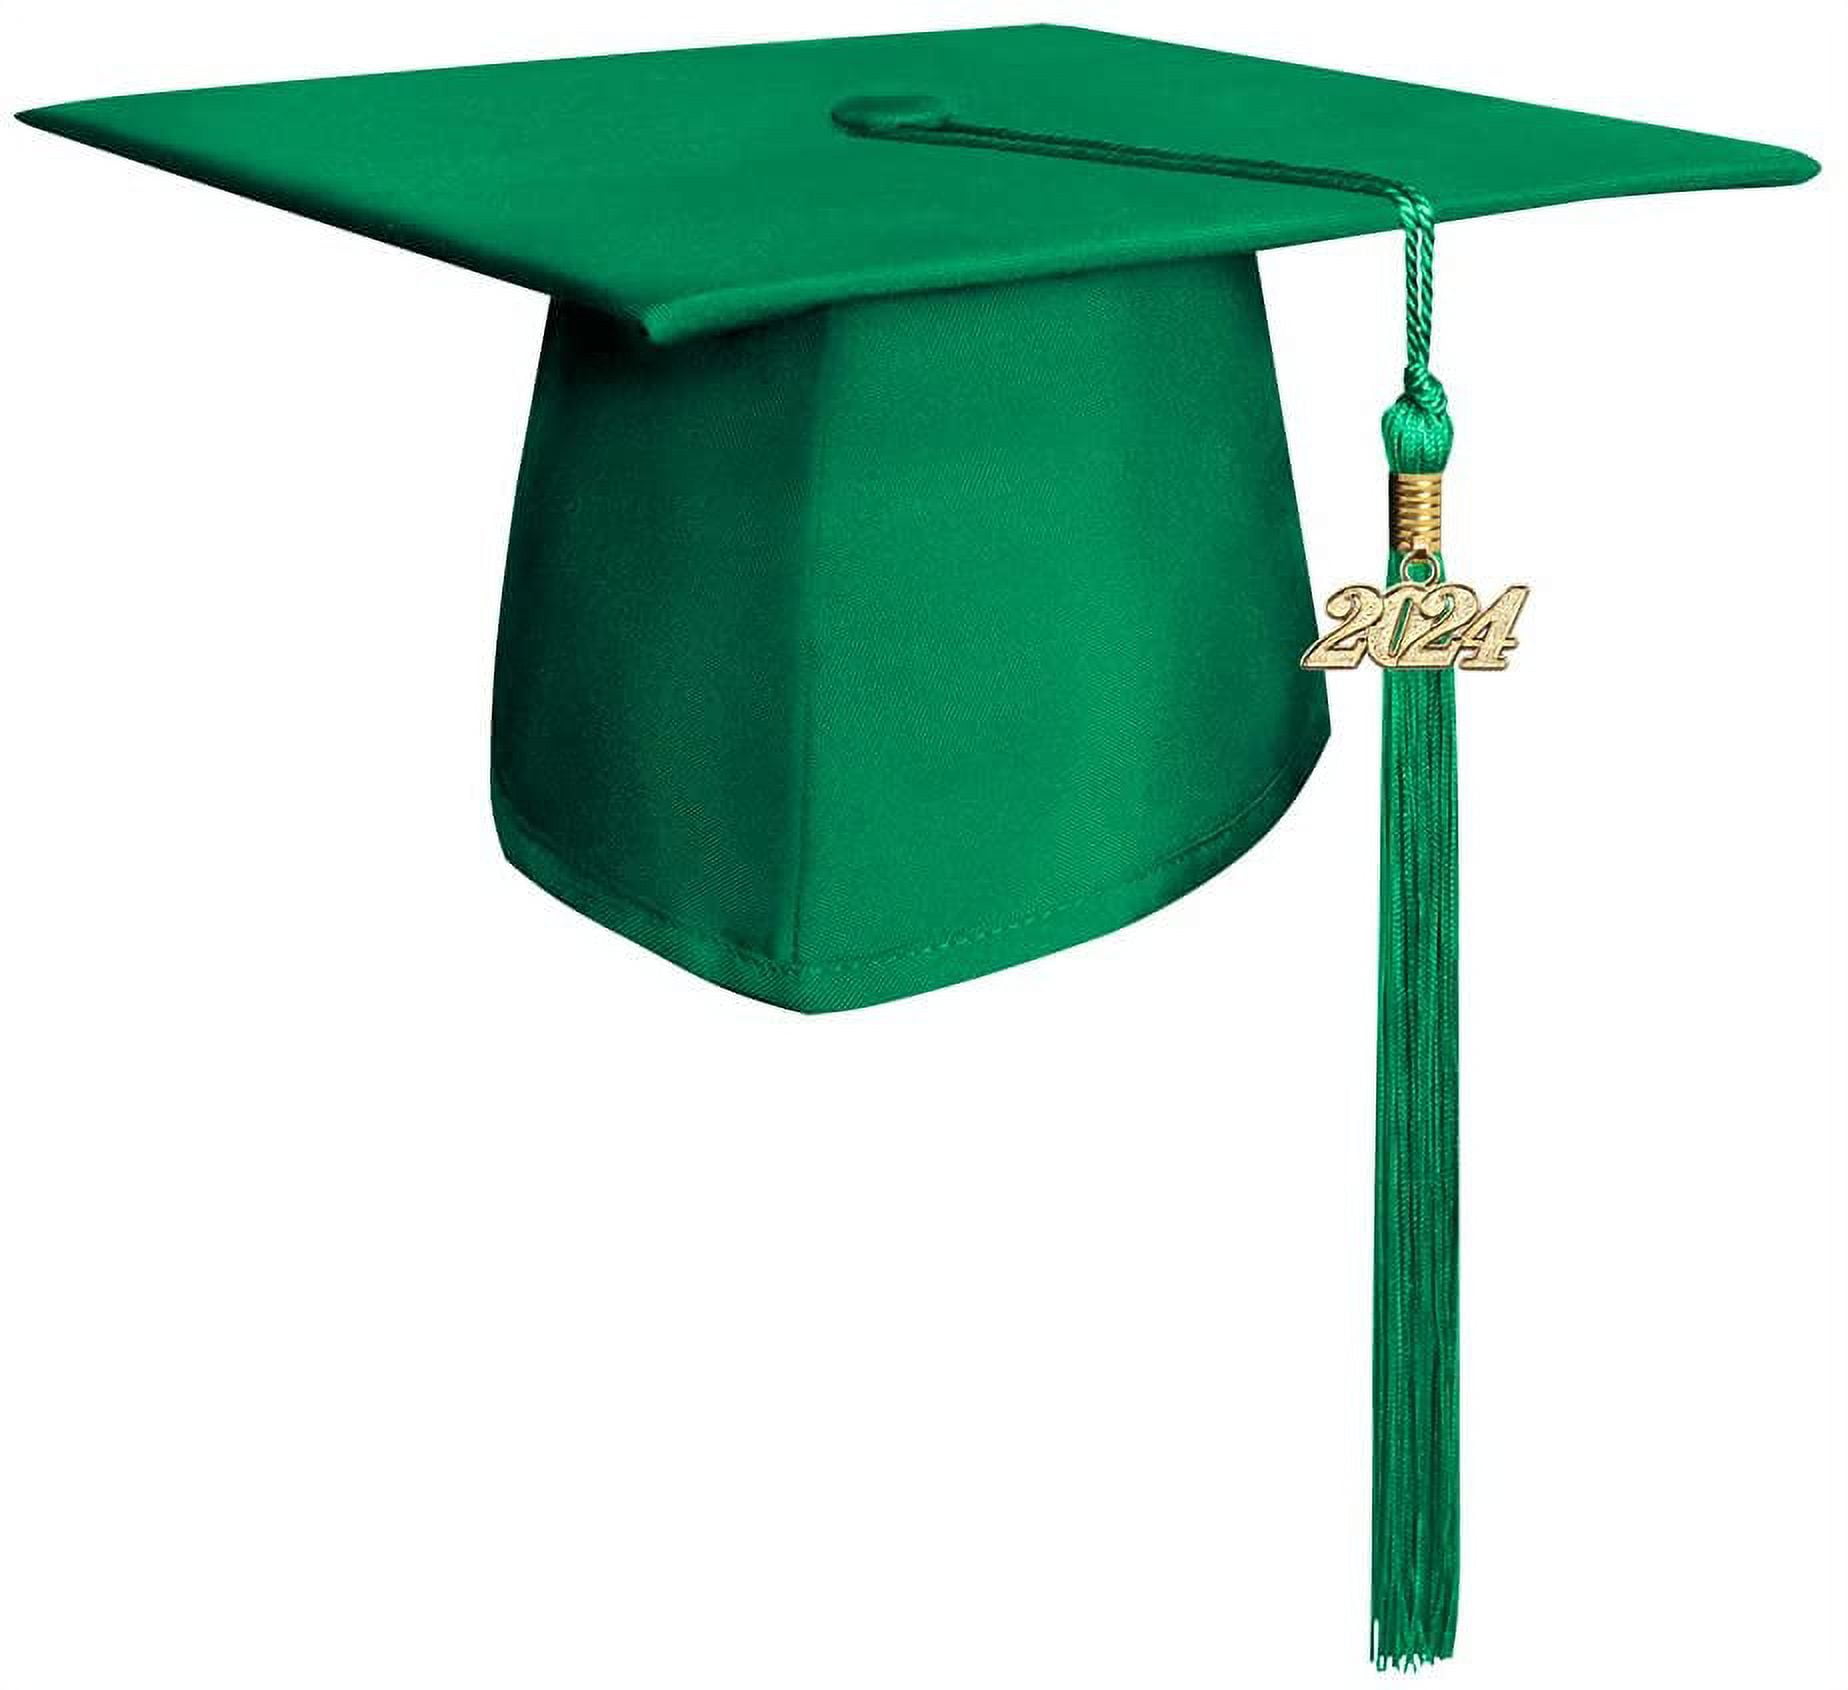 Endea Graduation Mixed Double Color Tassel with Gold Date Drop  (Green/White, 2024) 